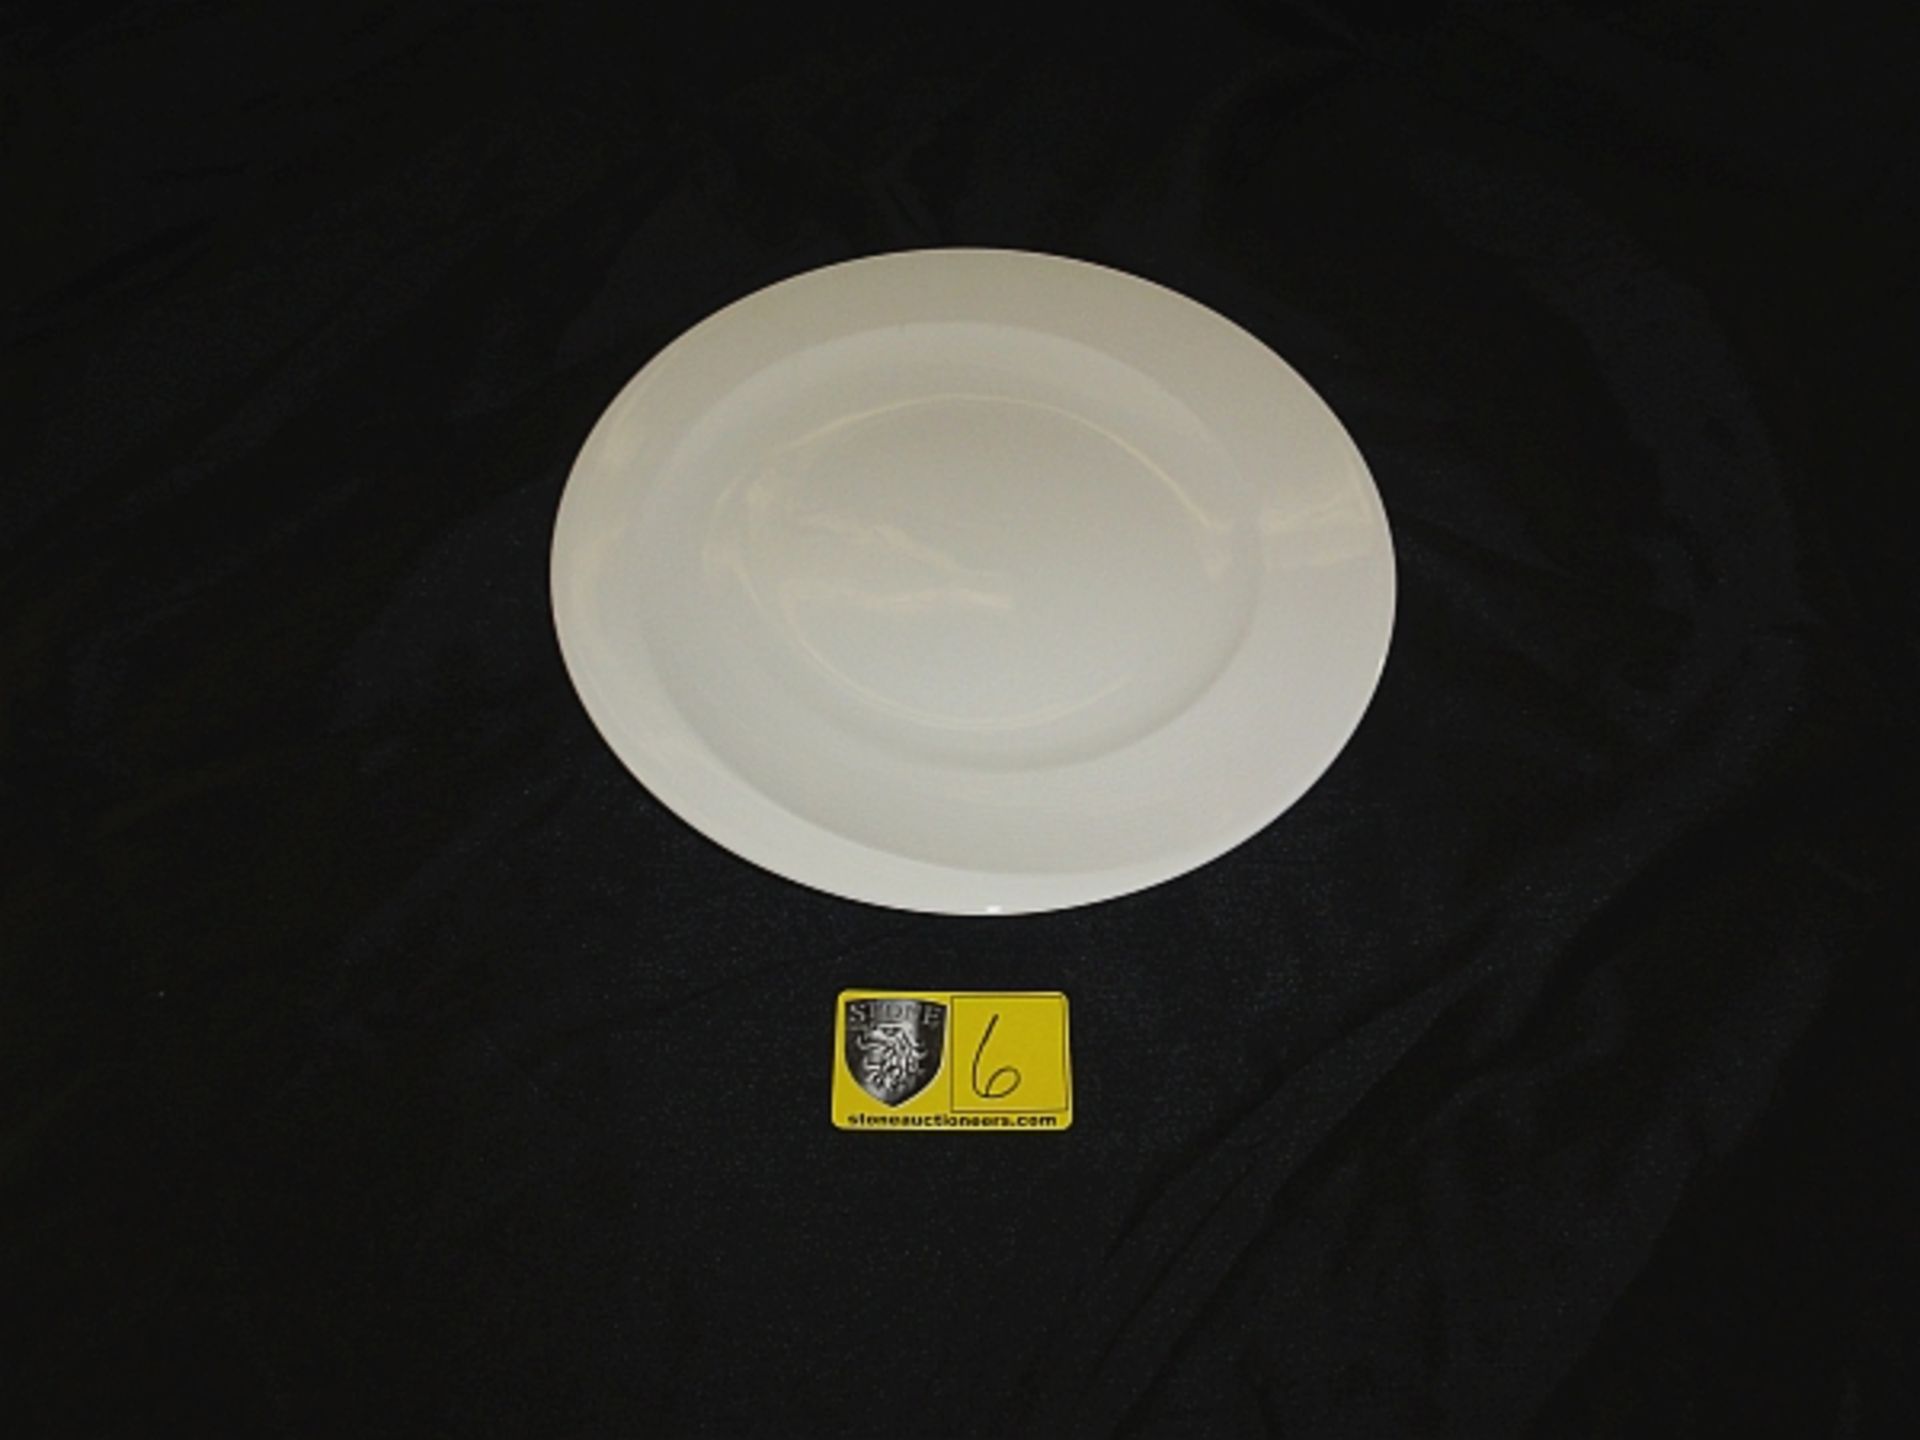 LOT OF 260 WHITE 10.75" DINNER PLATE- FORTESSA- LOT COMES IN 11 MICROWIRE CRATES BILLED @ $18 EA.